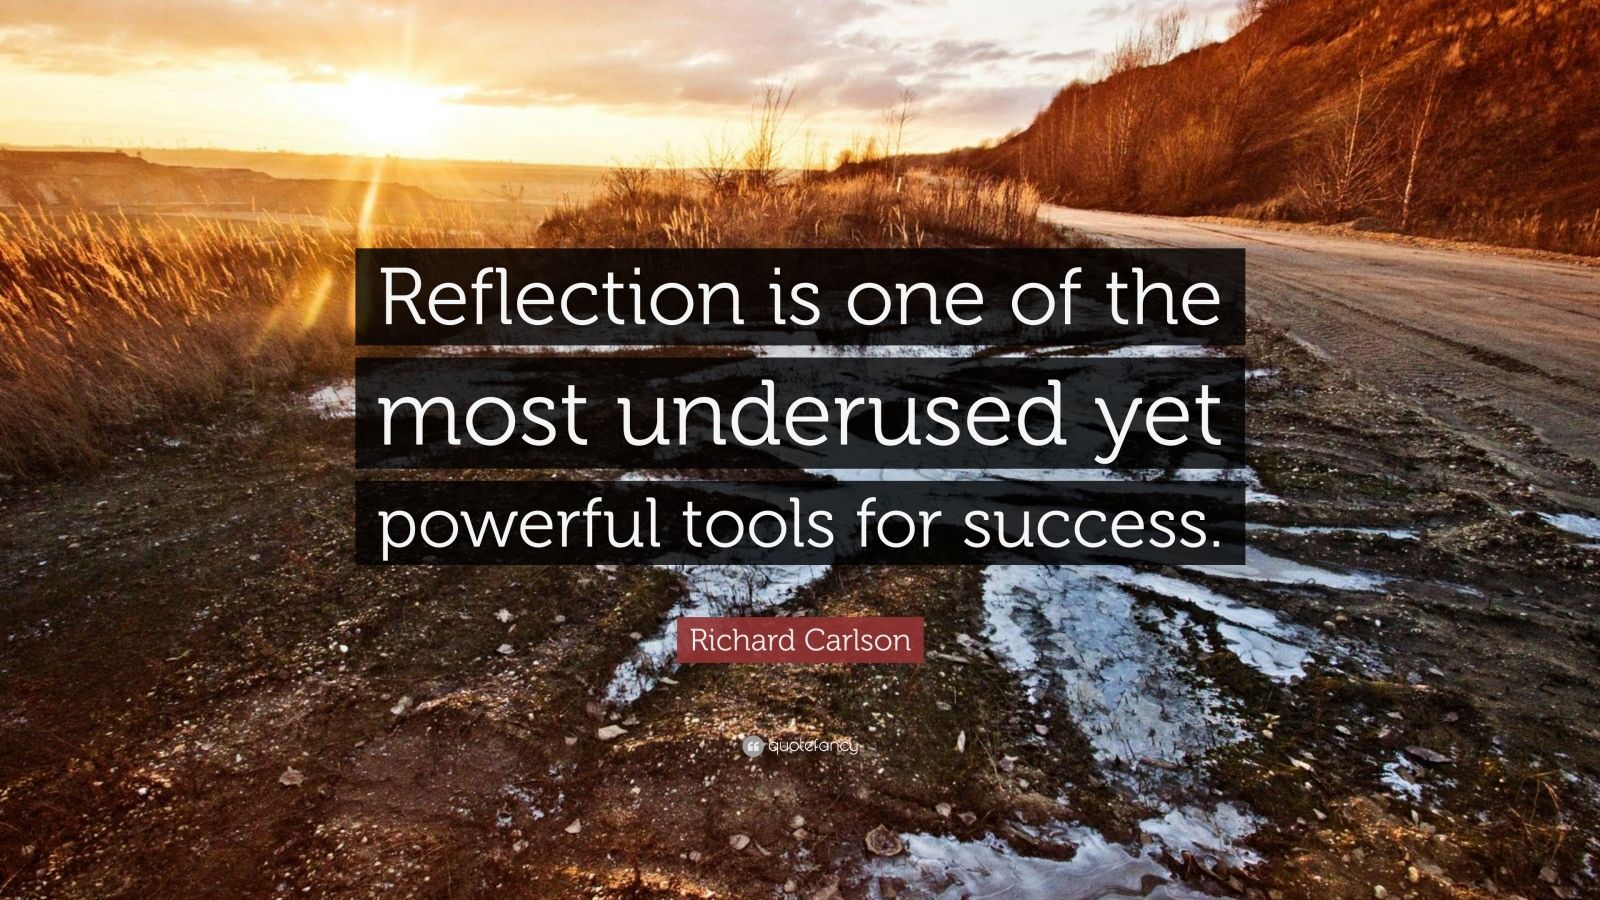 Richard Carlson Quote “Reflection is one of the most